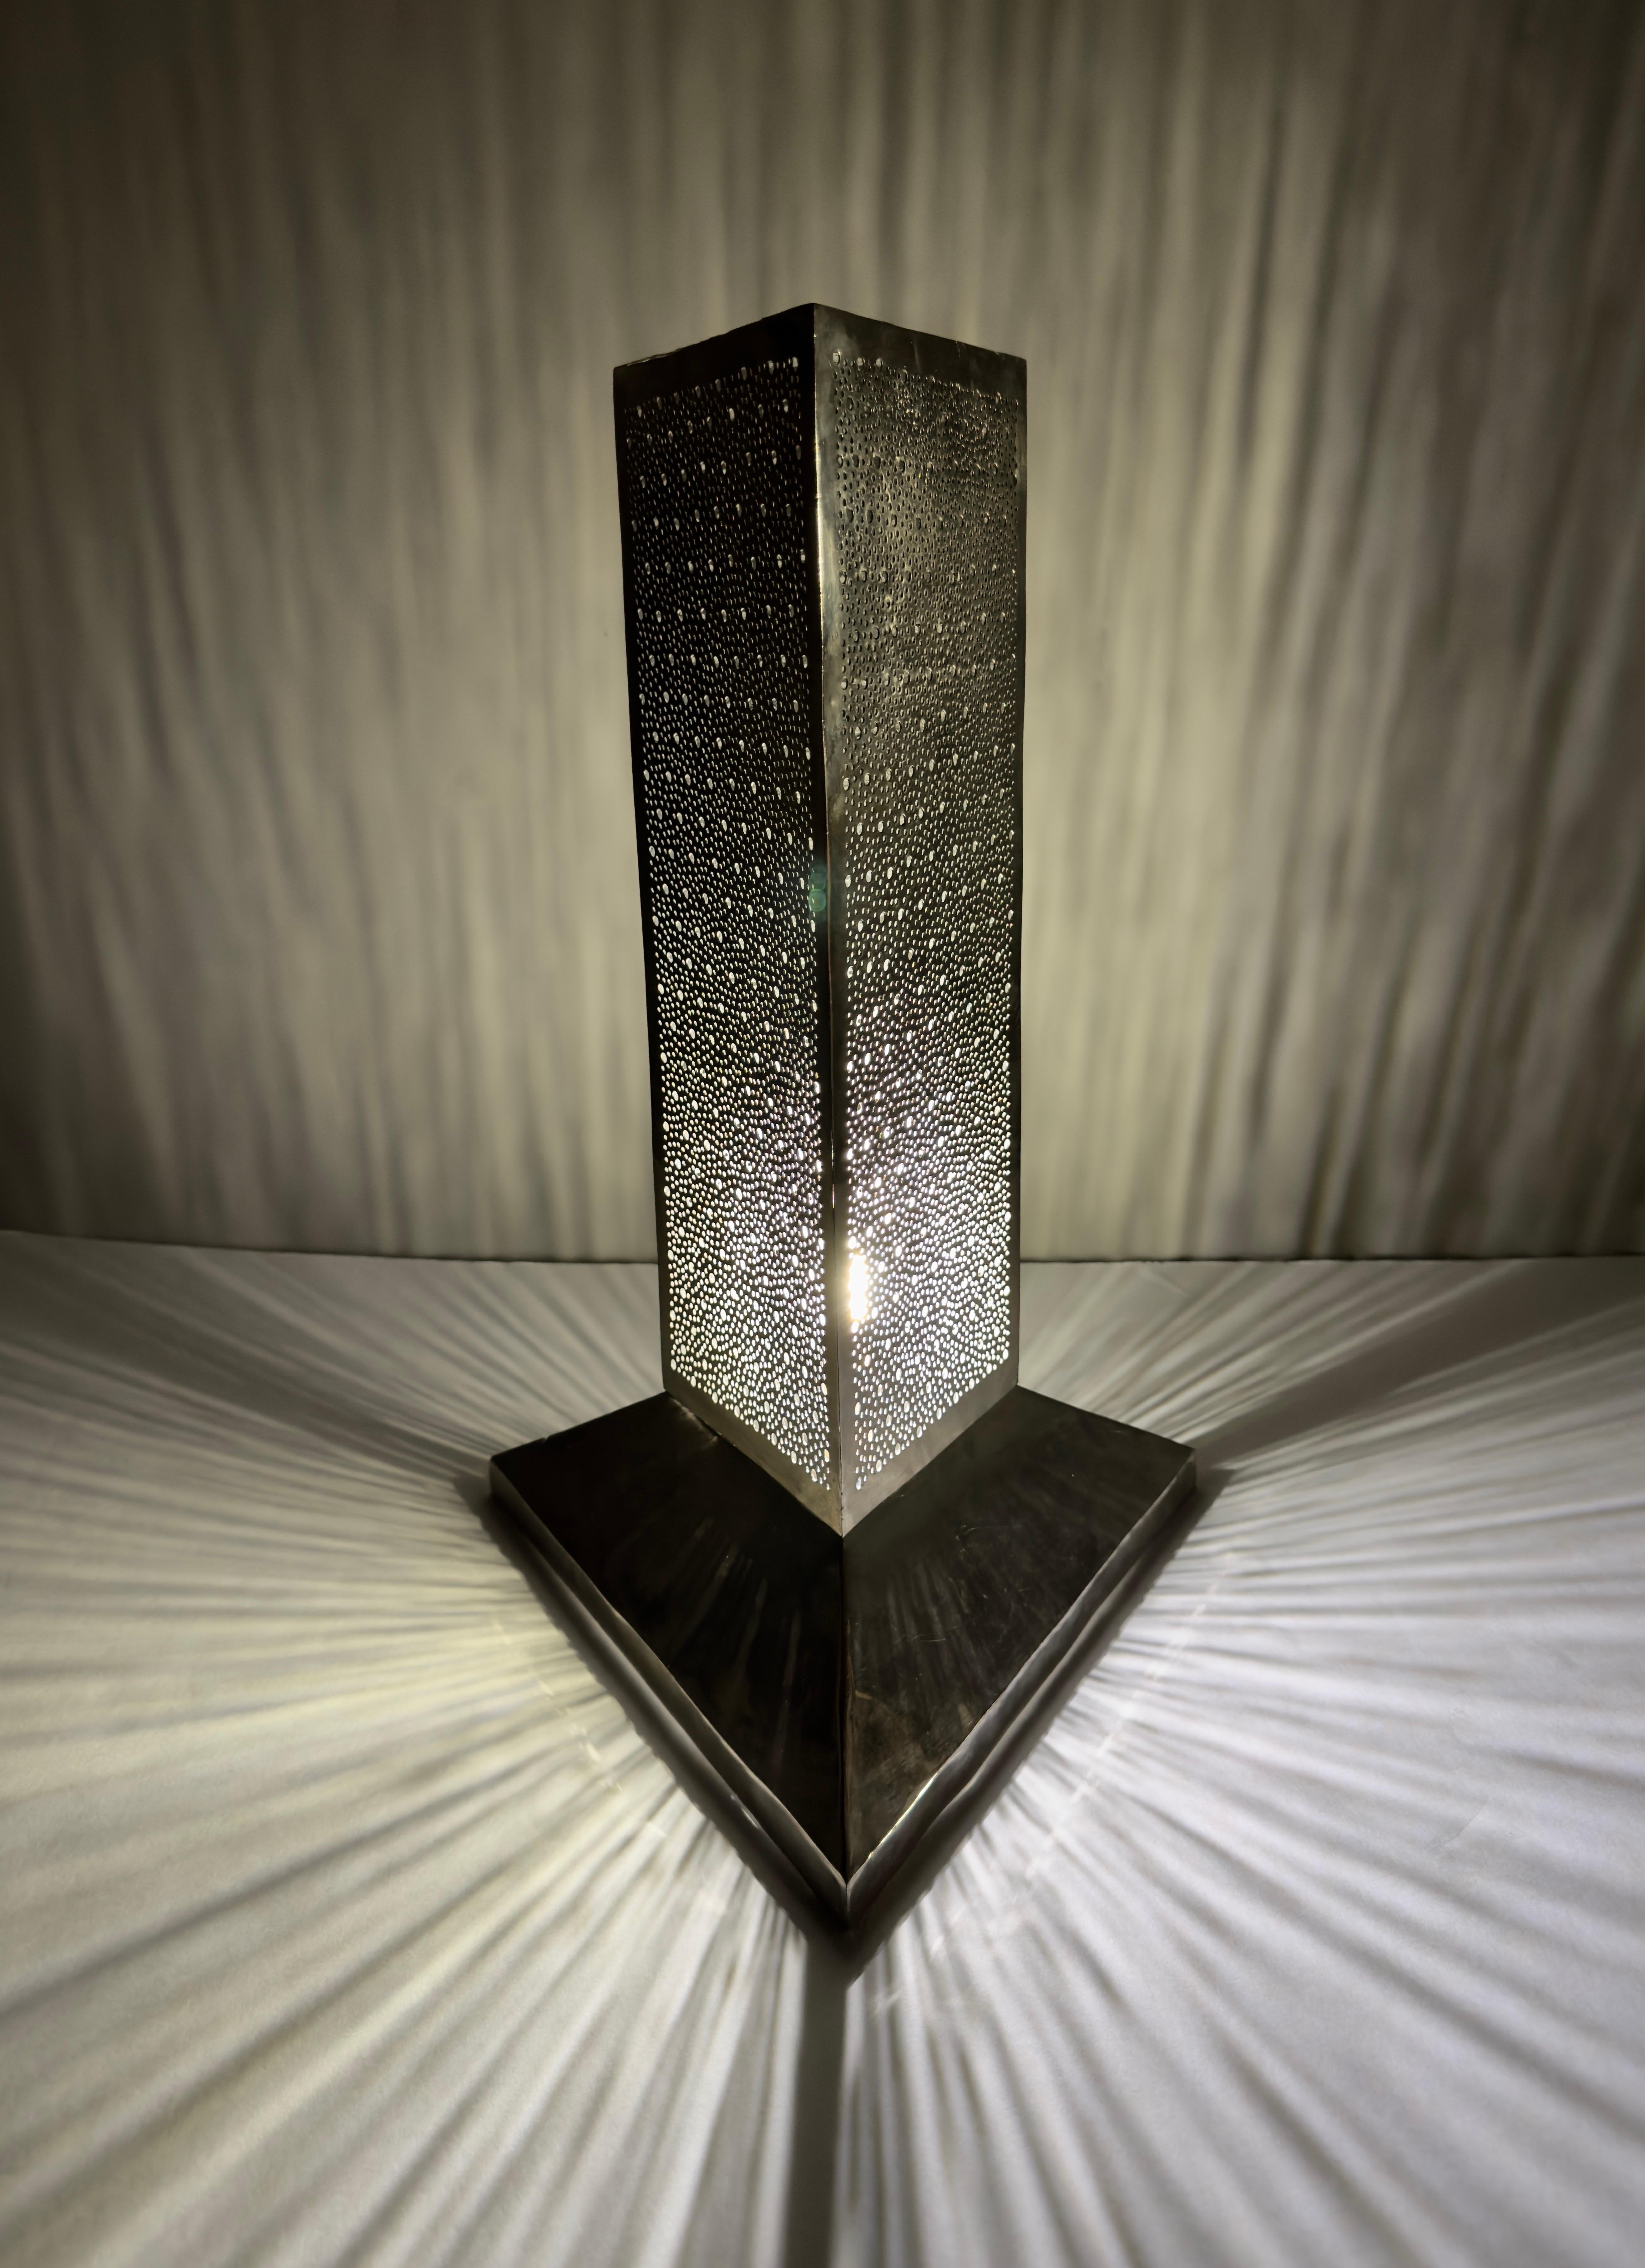 A Mid Century Modern style handmade tall and lean lamp. Standing proudly with triangular dimensions, this lamp embodies the essence of authenticity and sophistication. Every aspect of this lamp is carefully handcrafted, resulting in a piece that